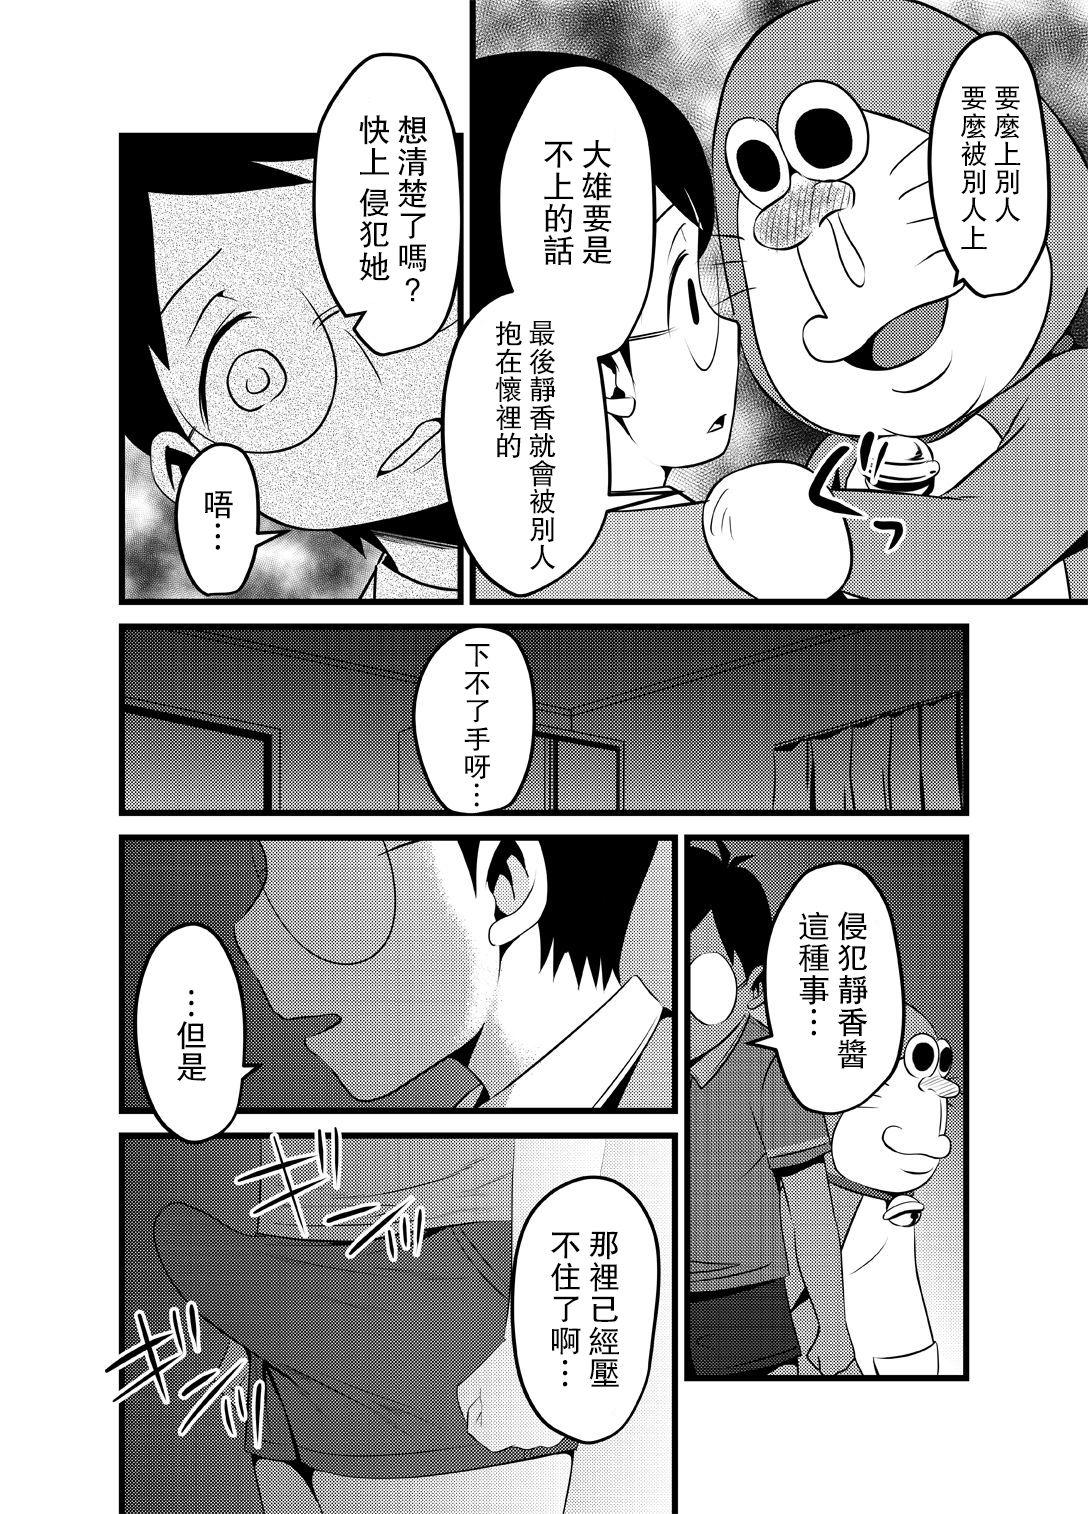 Pussy Licking [Babymaker (Beco)] Gesuemon STAND-MY-D (Doraemon) [Digital] [Chinese] [路过的骑士汉化组] - Doraemon Tamil - Page 5